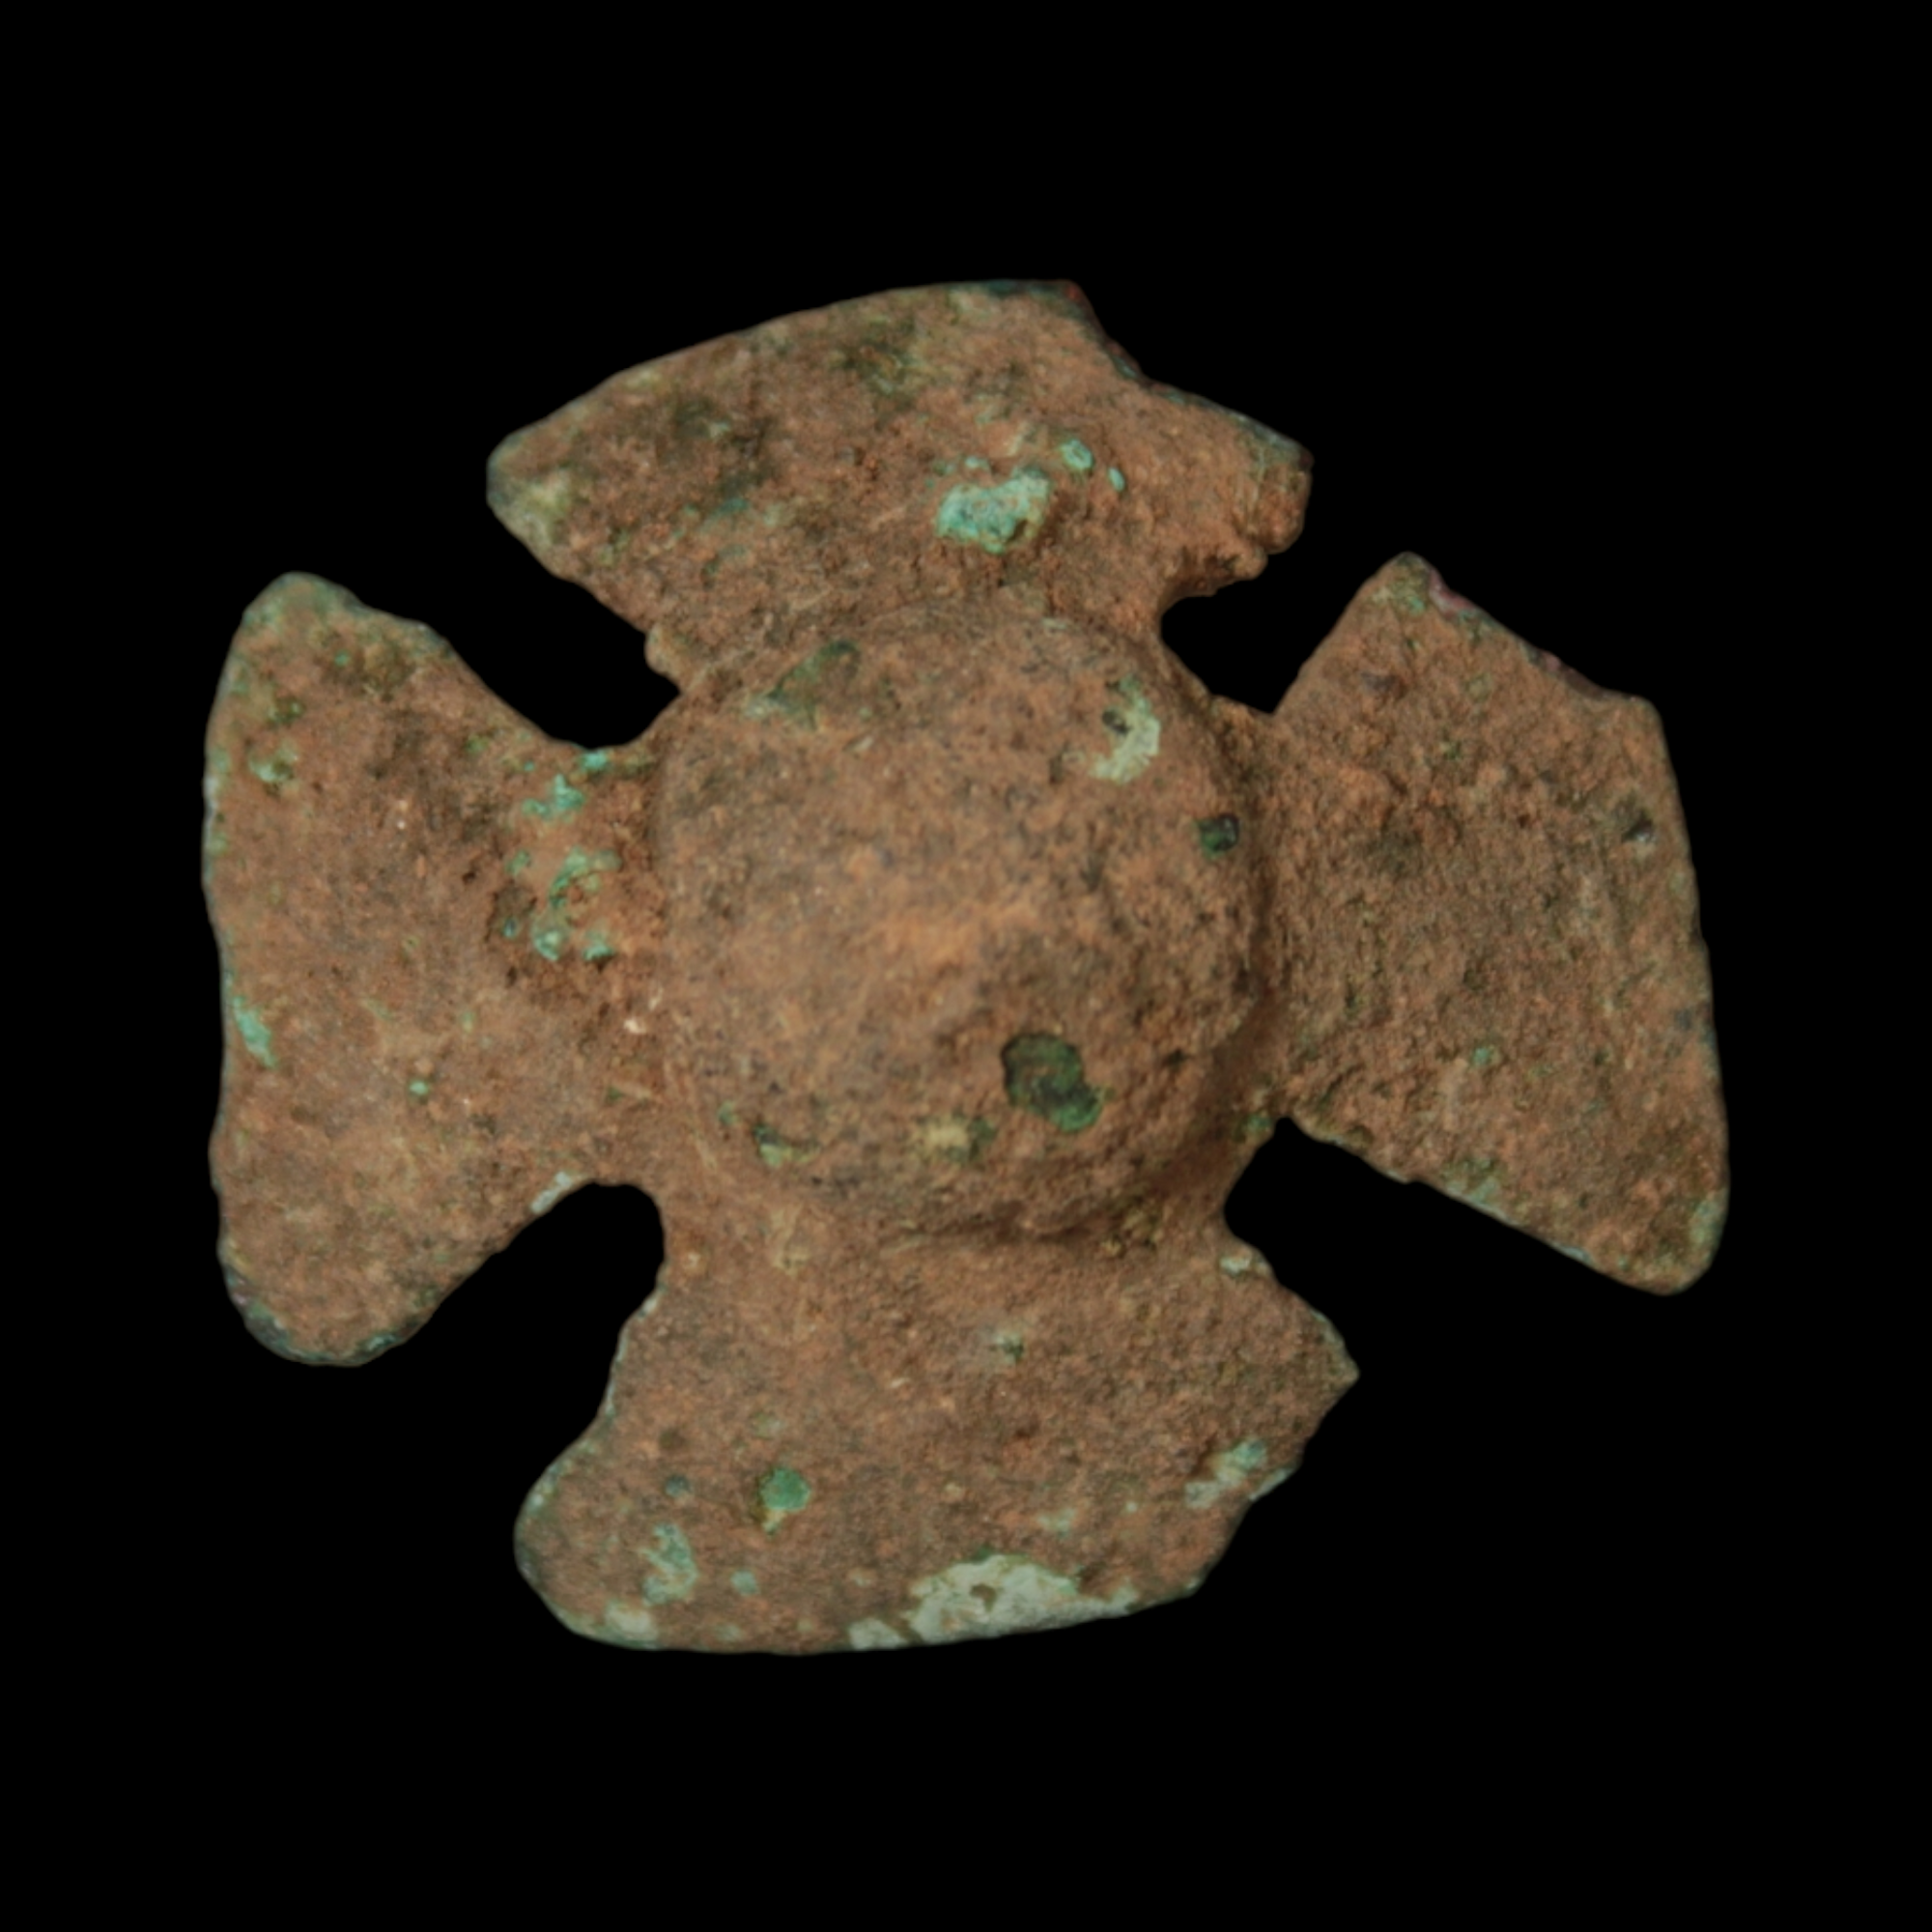 Ancient or Early Medieval Bronze Ornament, #3 - c. 800 BCE to 1000 CE - Central/Eastern Europe - 3/8/23 Auction